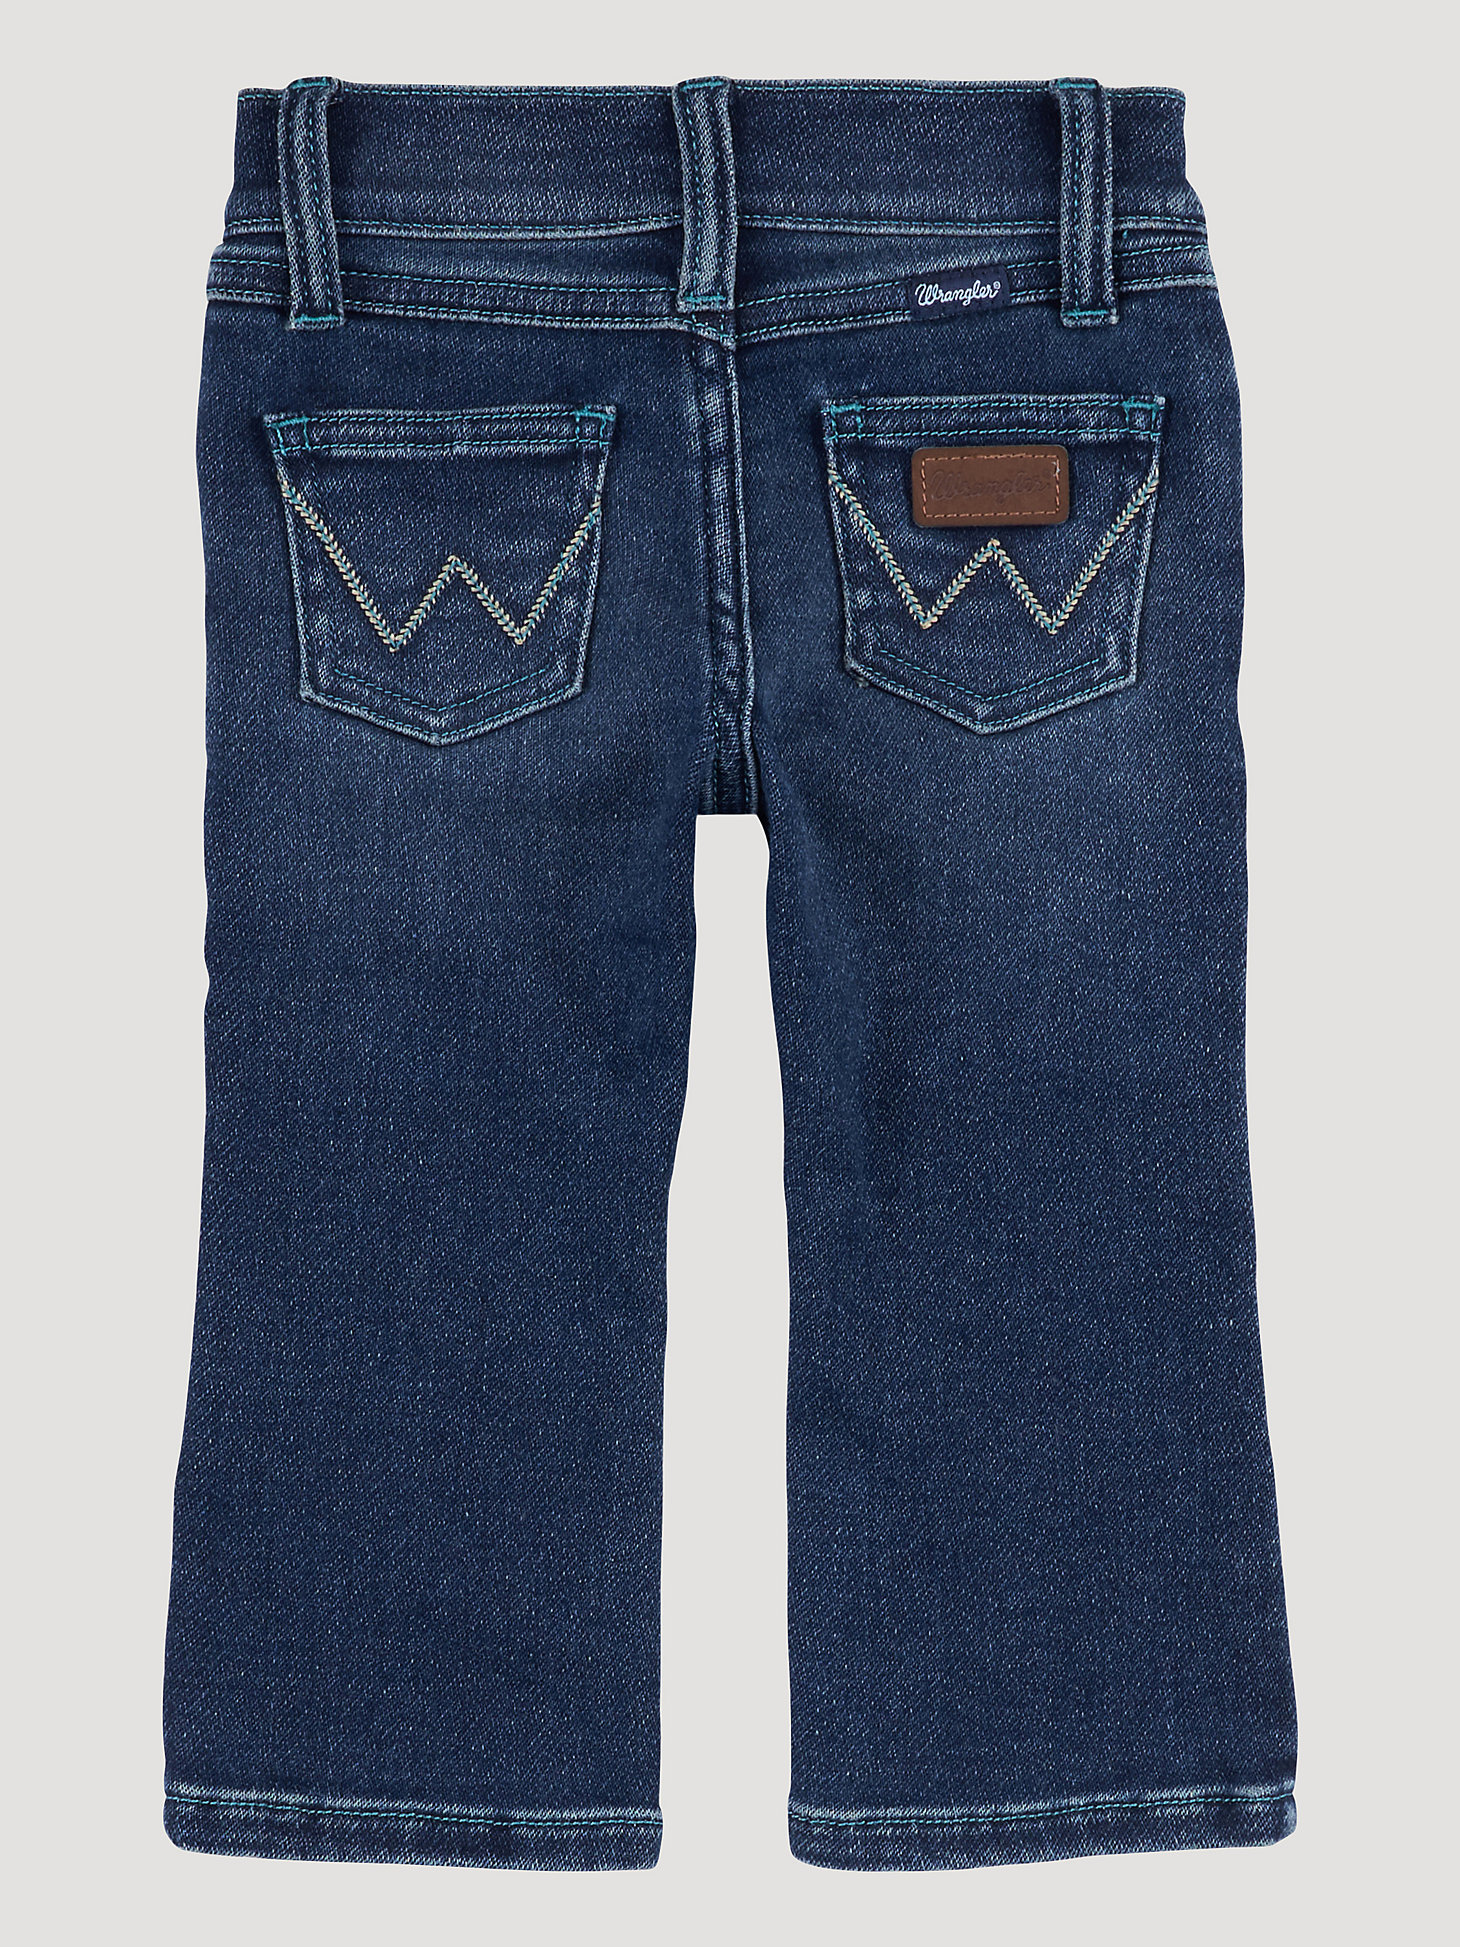 Little Girl's W Stitched Bootcut Jean in Amelia alternative view 1